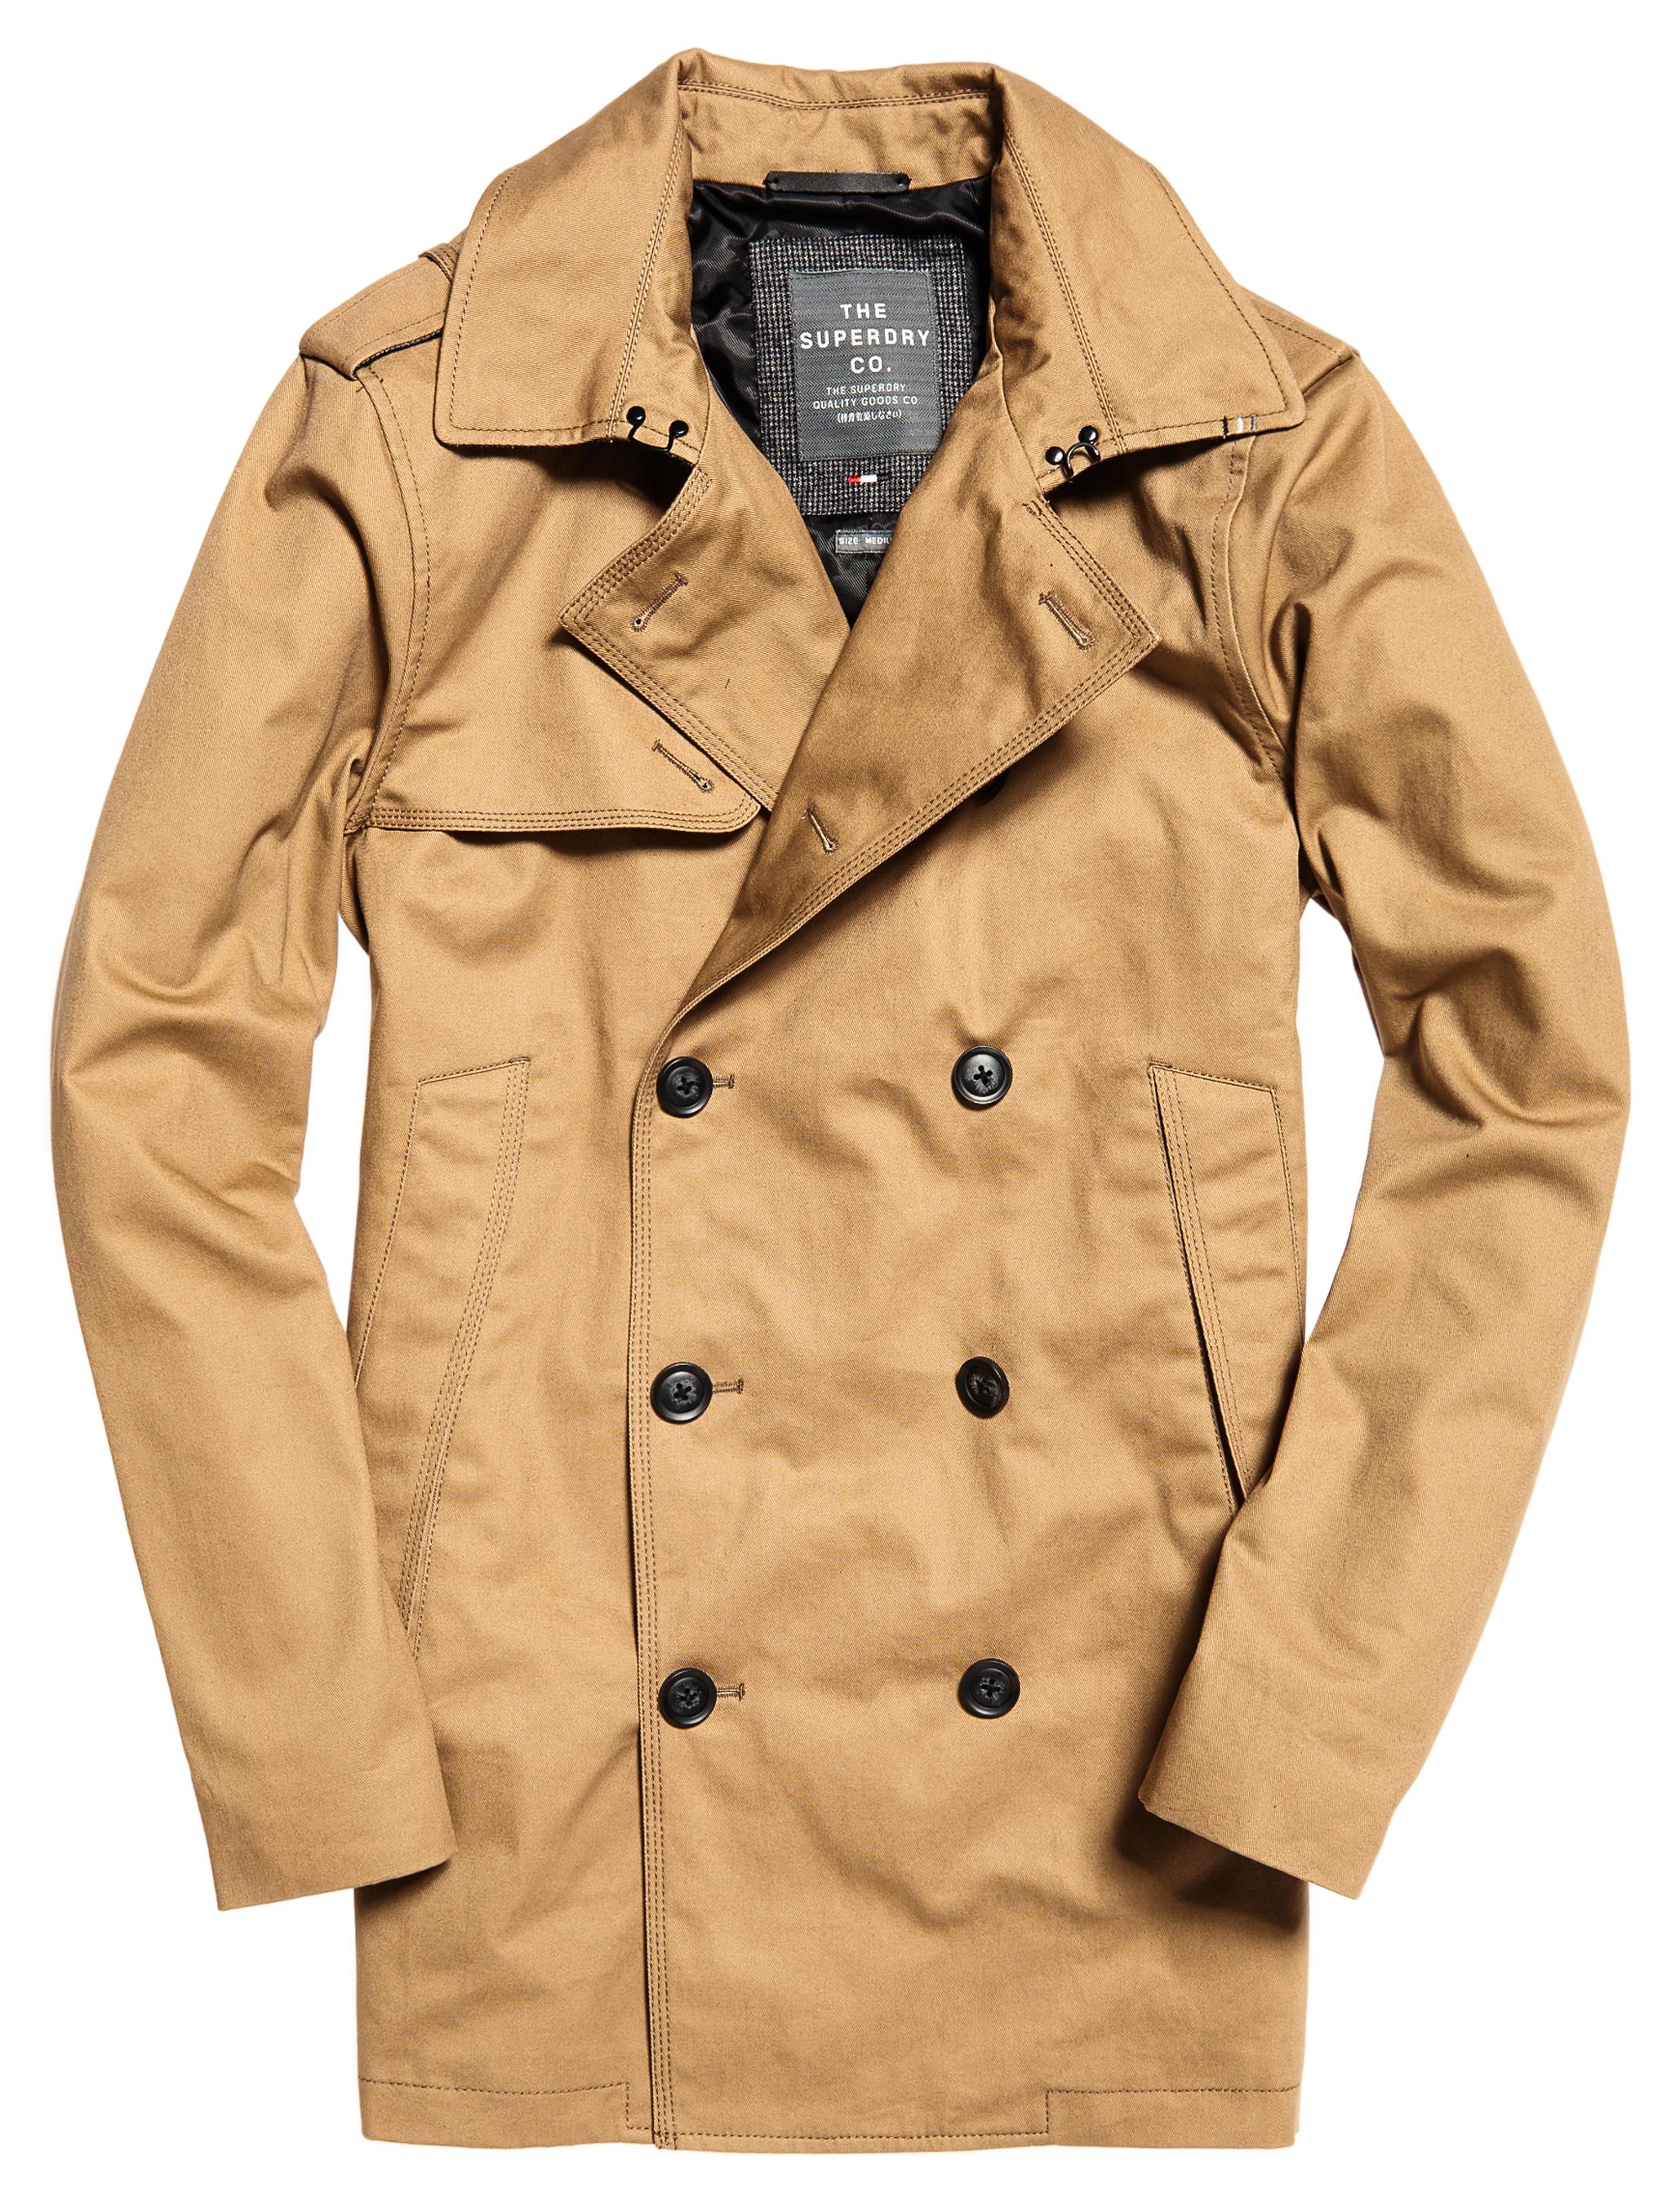 Superdry Remastered Rogue Trench Coat £124.99 www.superdry.com.jpg